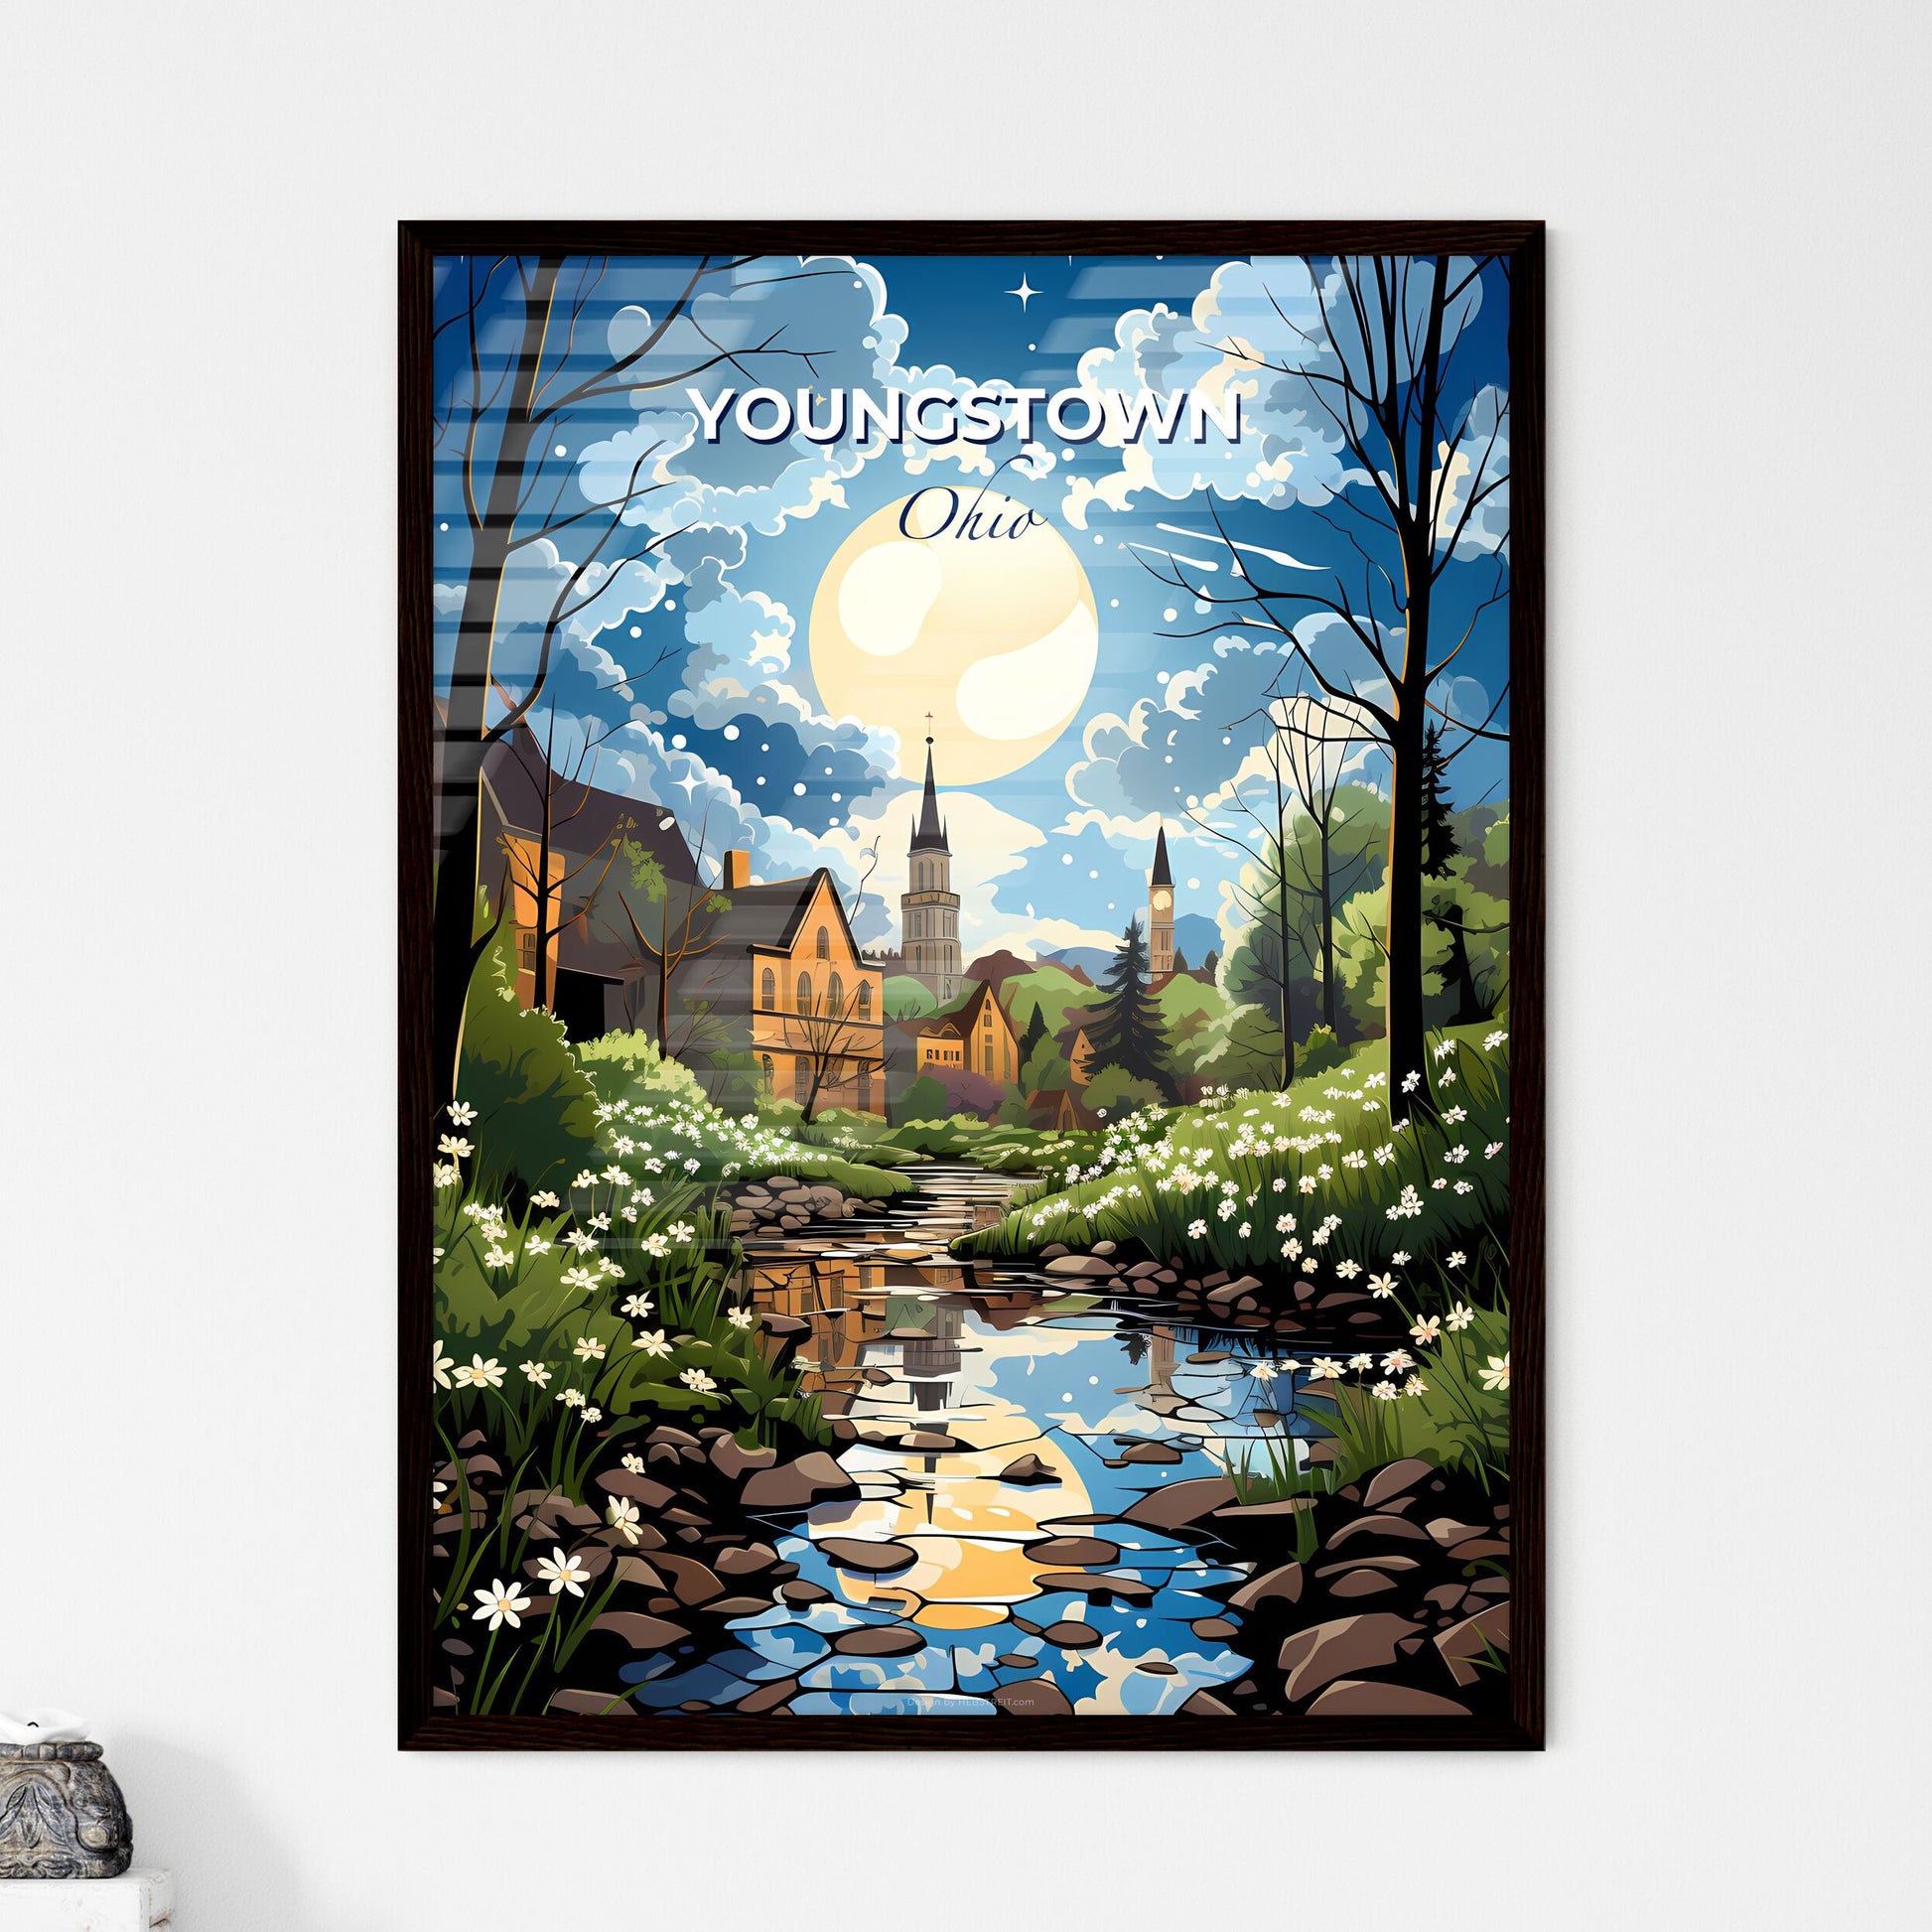 Youngstown, Ohio, A Poster of a river running through a forest Default Title